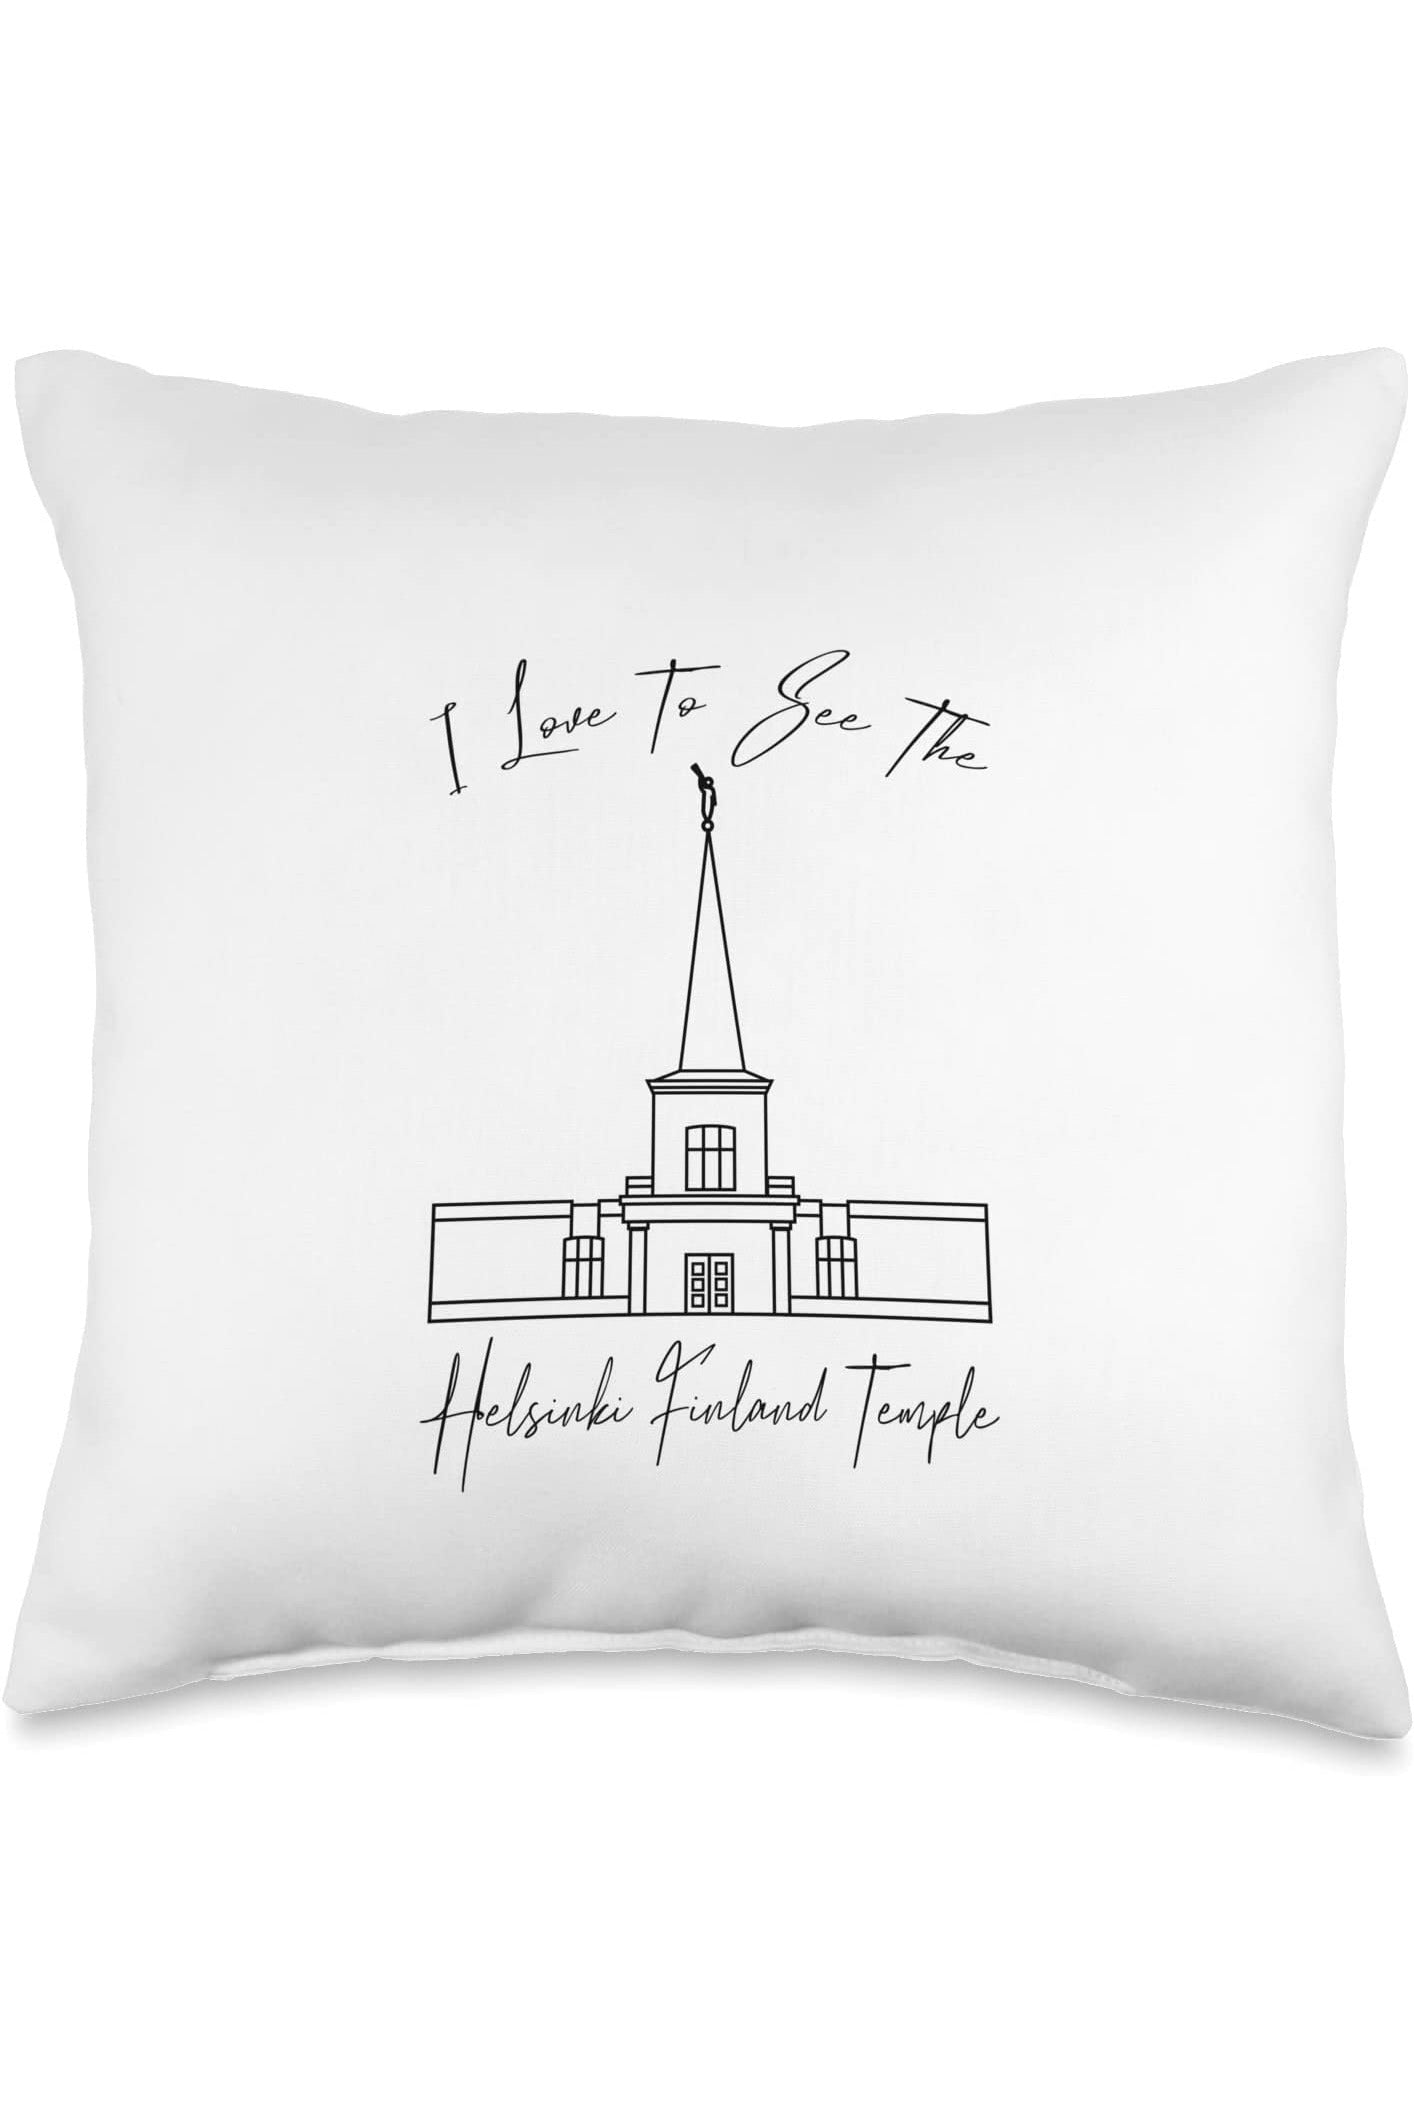 Helsinki Finland Temple Throw Pillows - Calligraphy Style (English) US